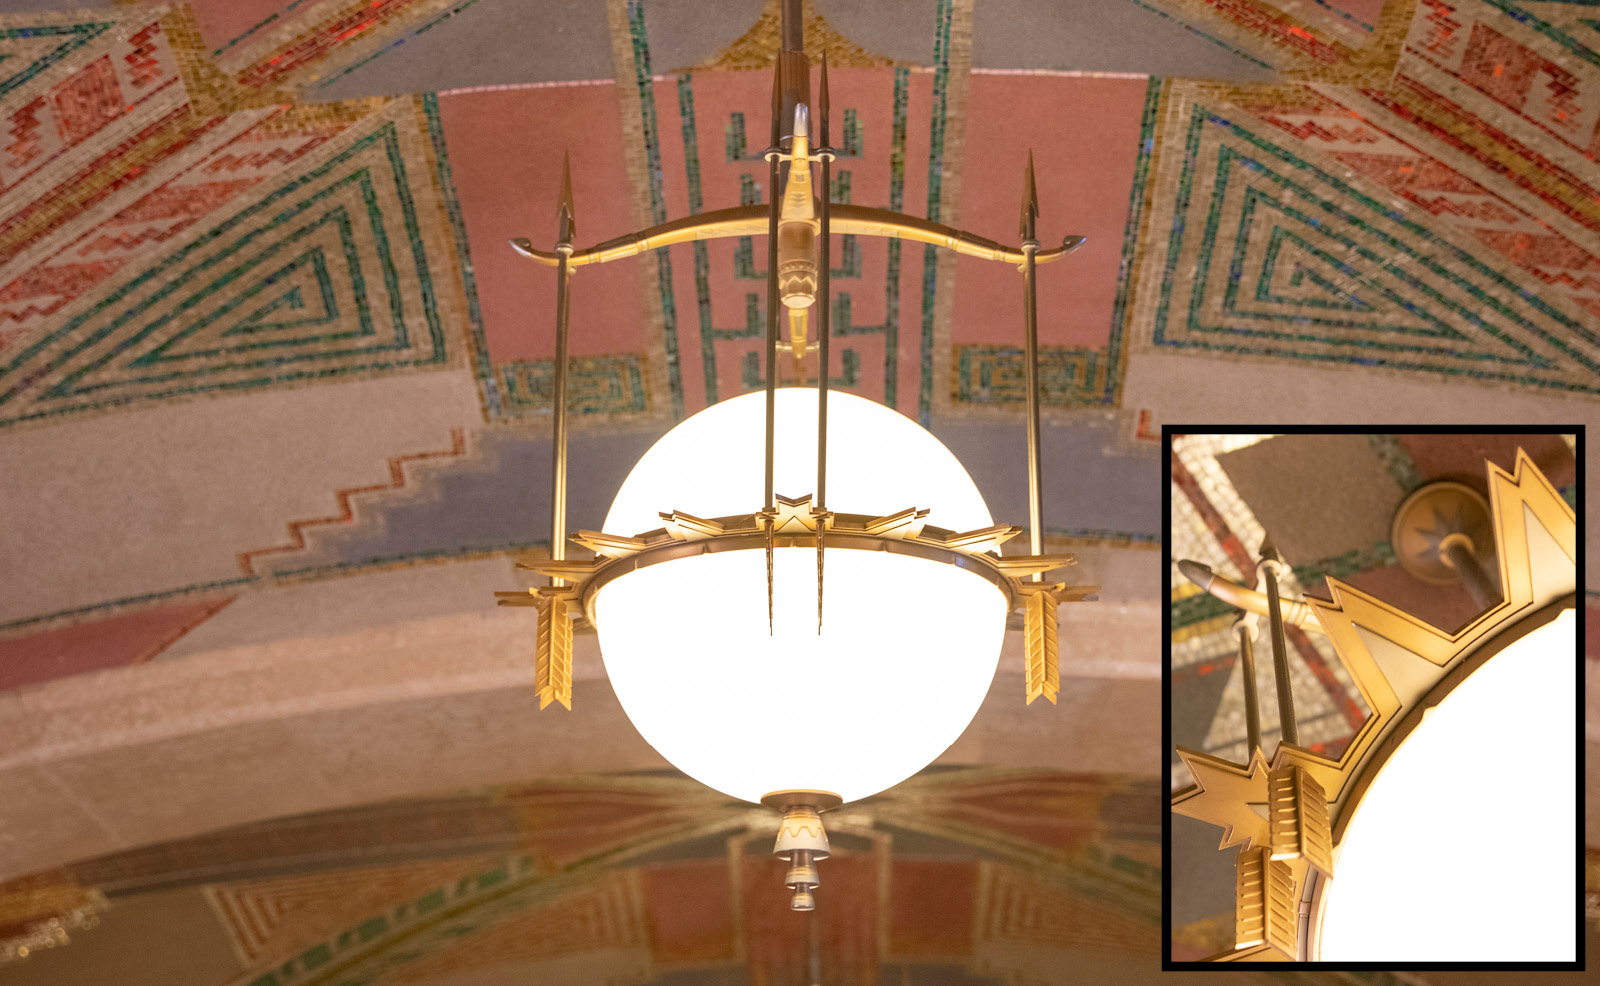 Image of light fixtures with an inset of the light fixture details featuring nickel and bronze arrows